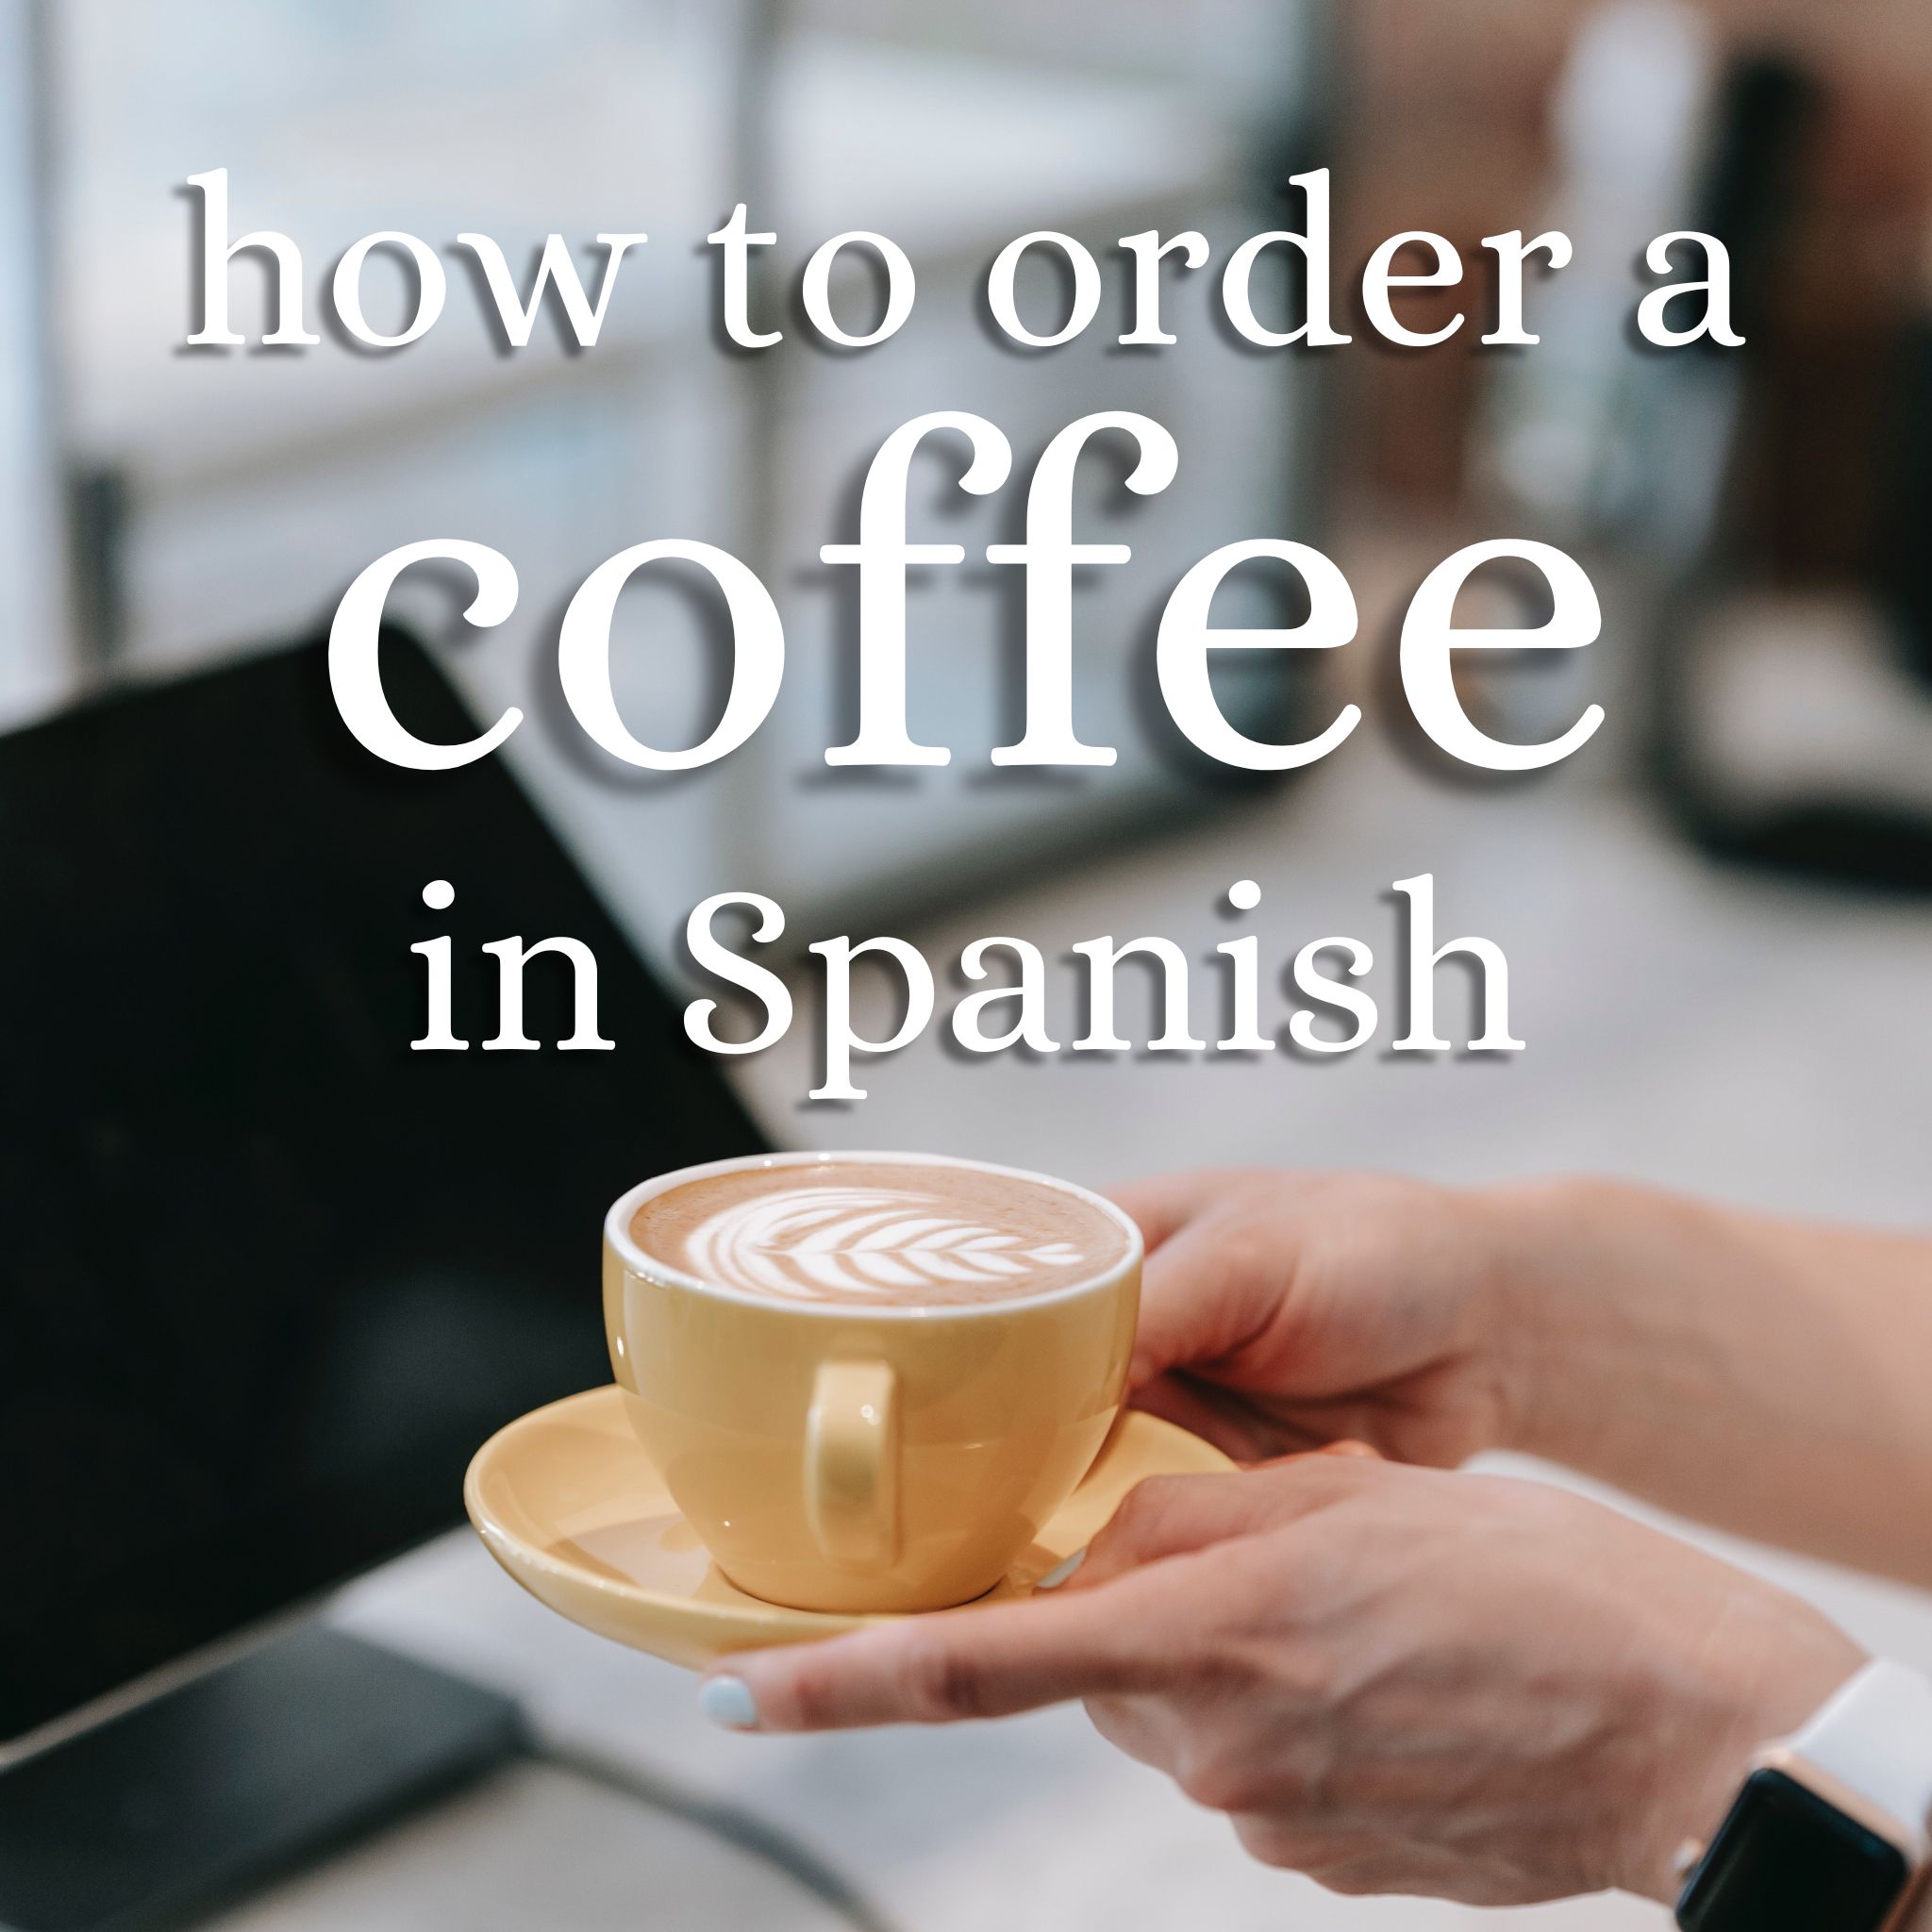 How to order a coffee in Spanish